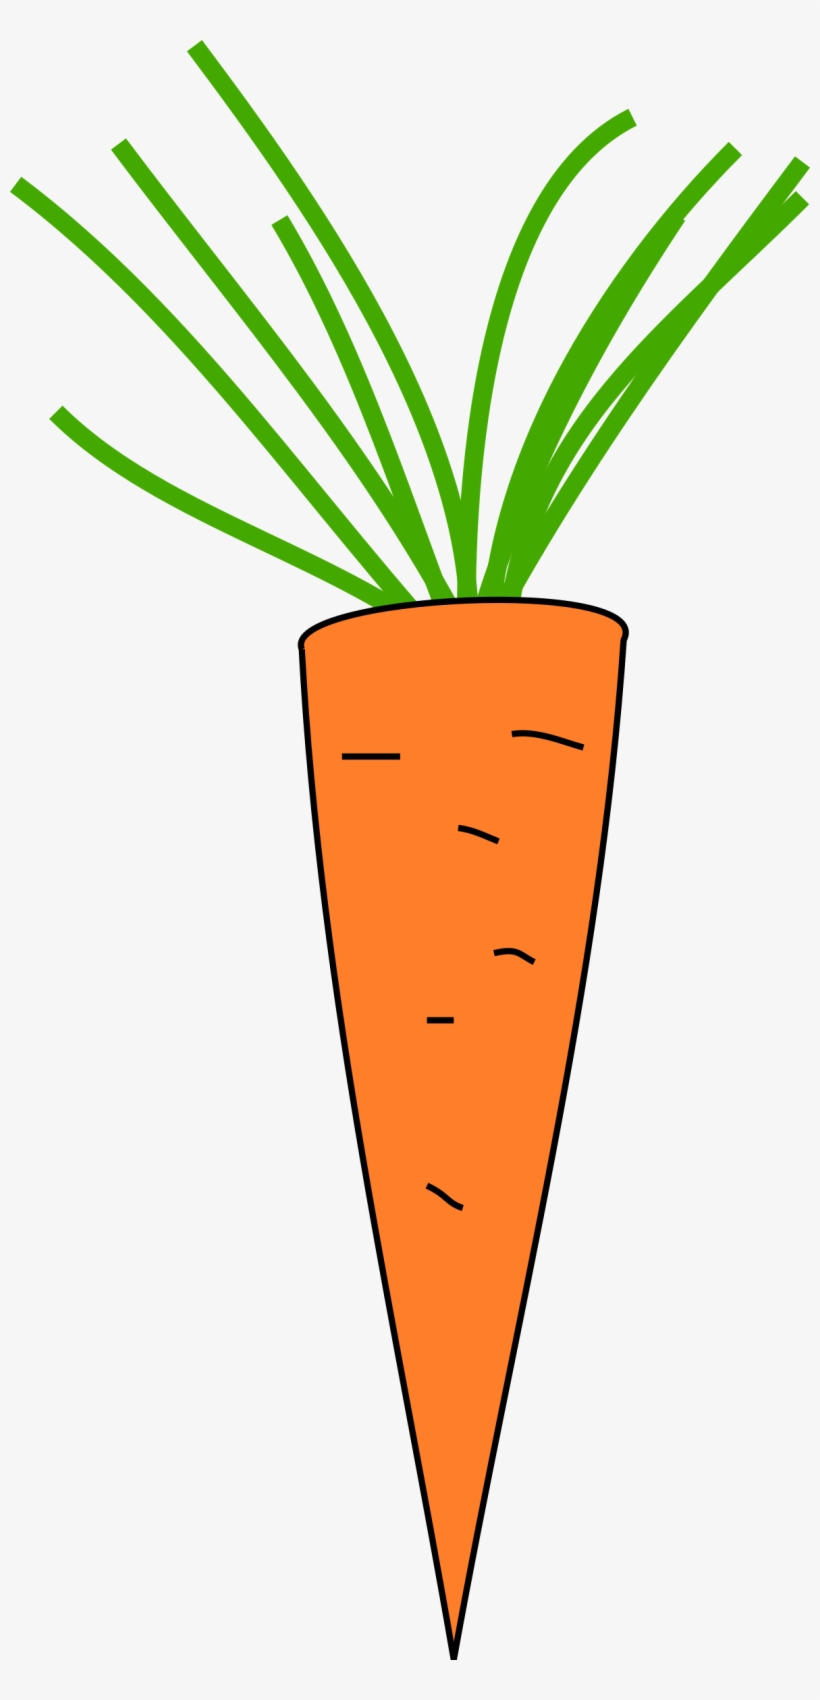 Free Download Copyright Free Carrot Clipart Carrot - Copyright Free Clipart Carrot, transparent png #1693108